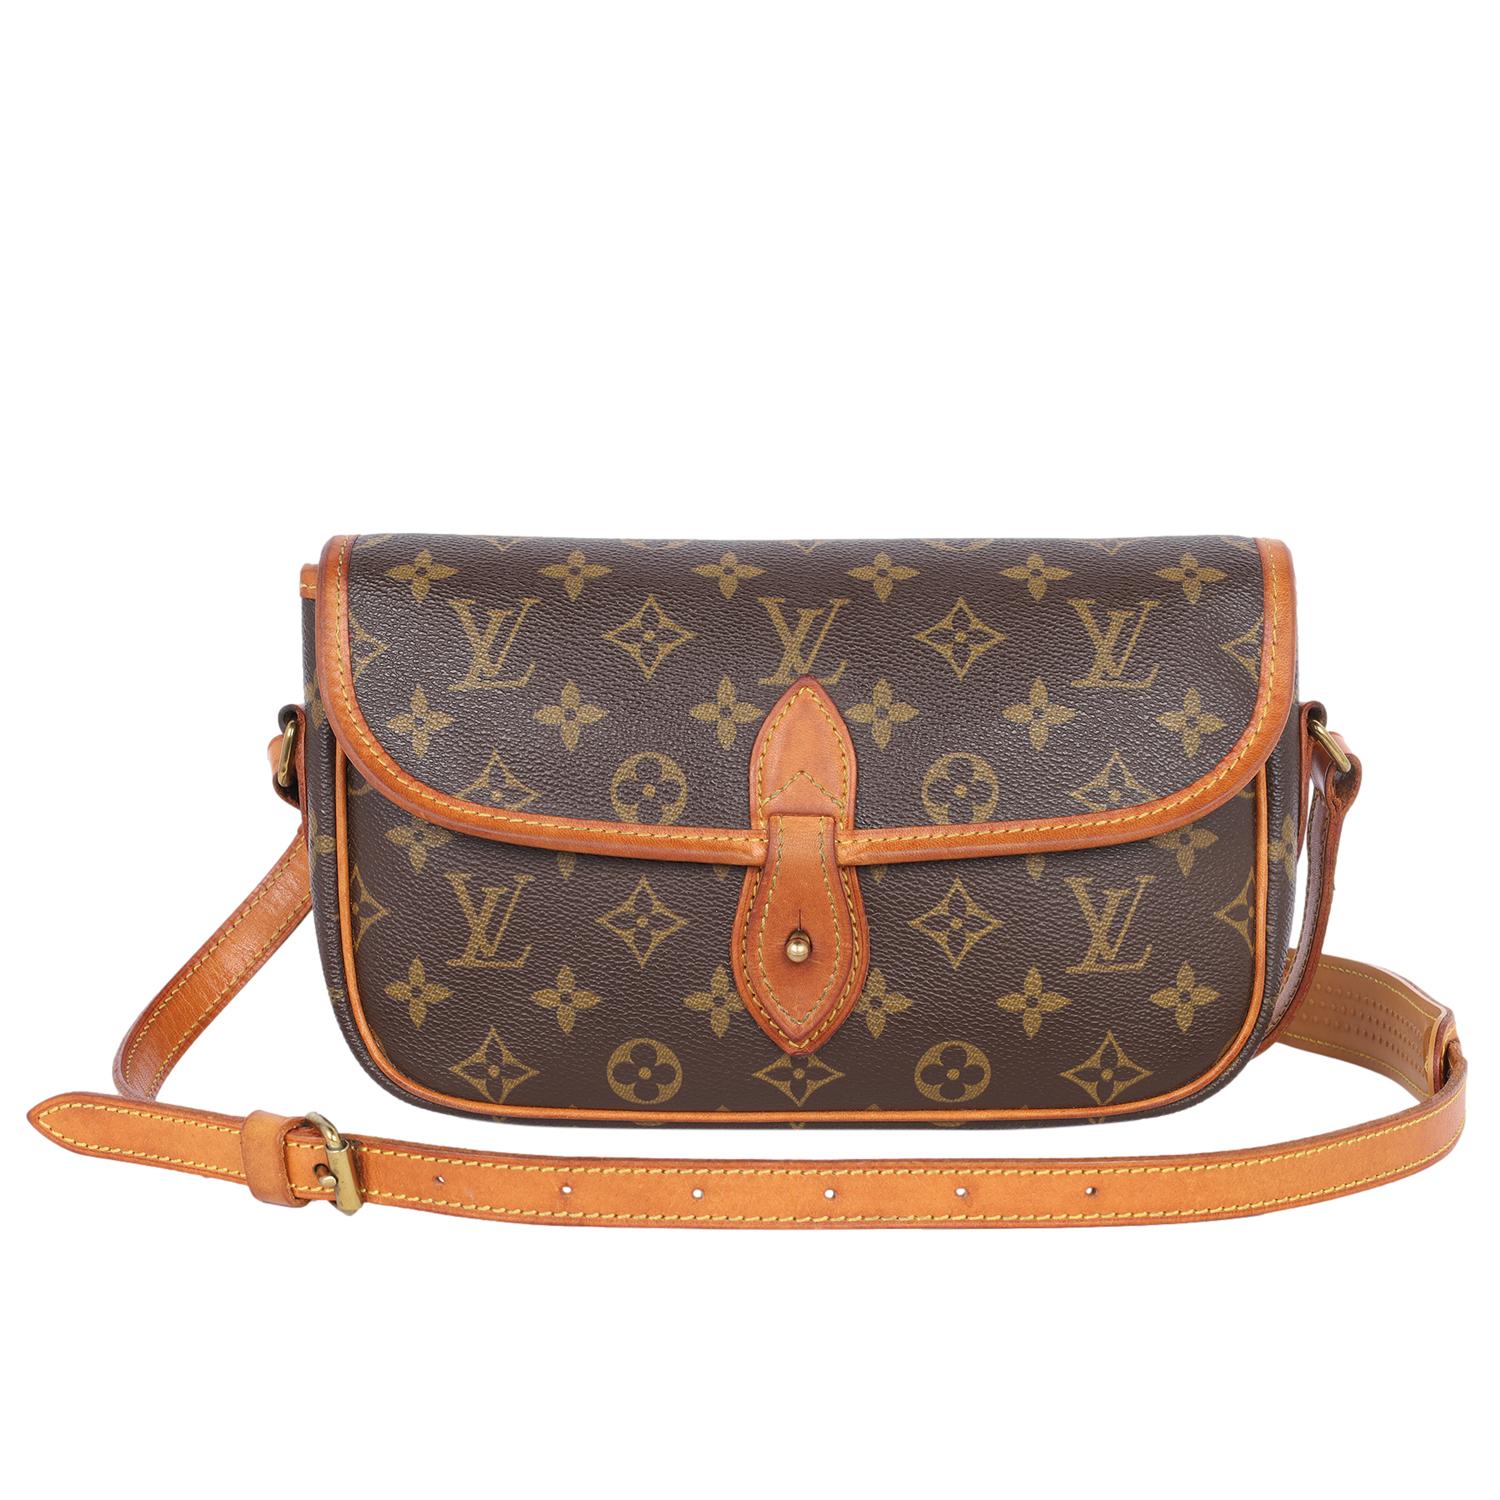 Louis Vuitton Sologne Monogram Canvas Crossbody Bag In Good Condition For Sale In Salt Lake Cty, UT